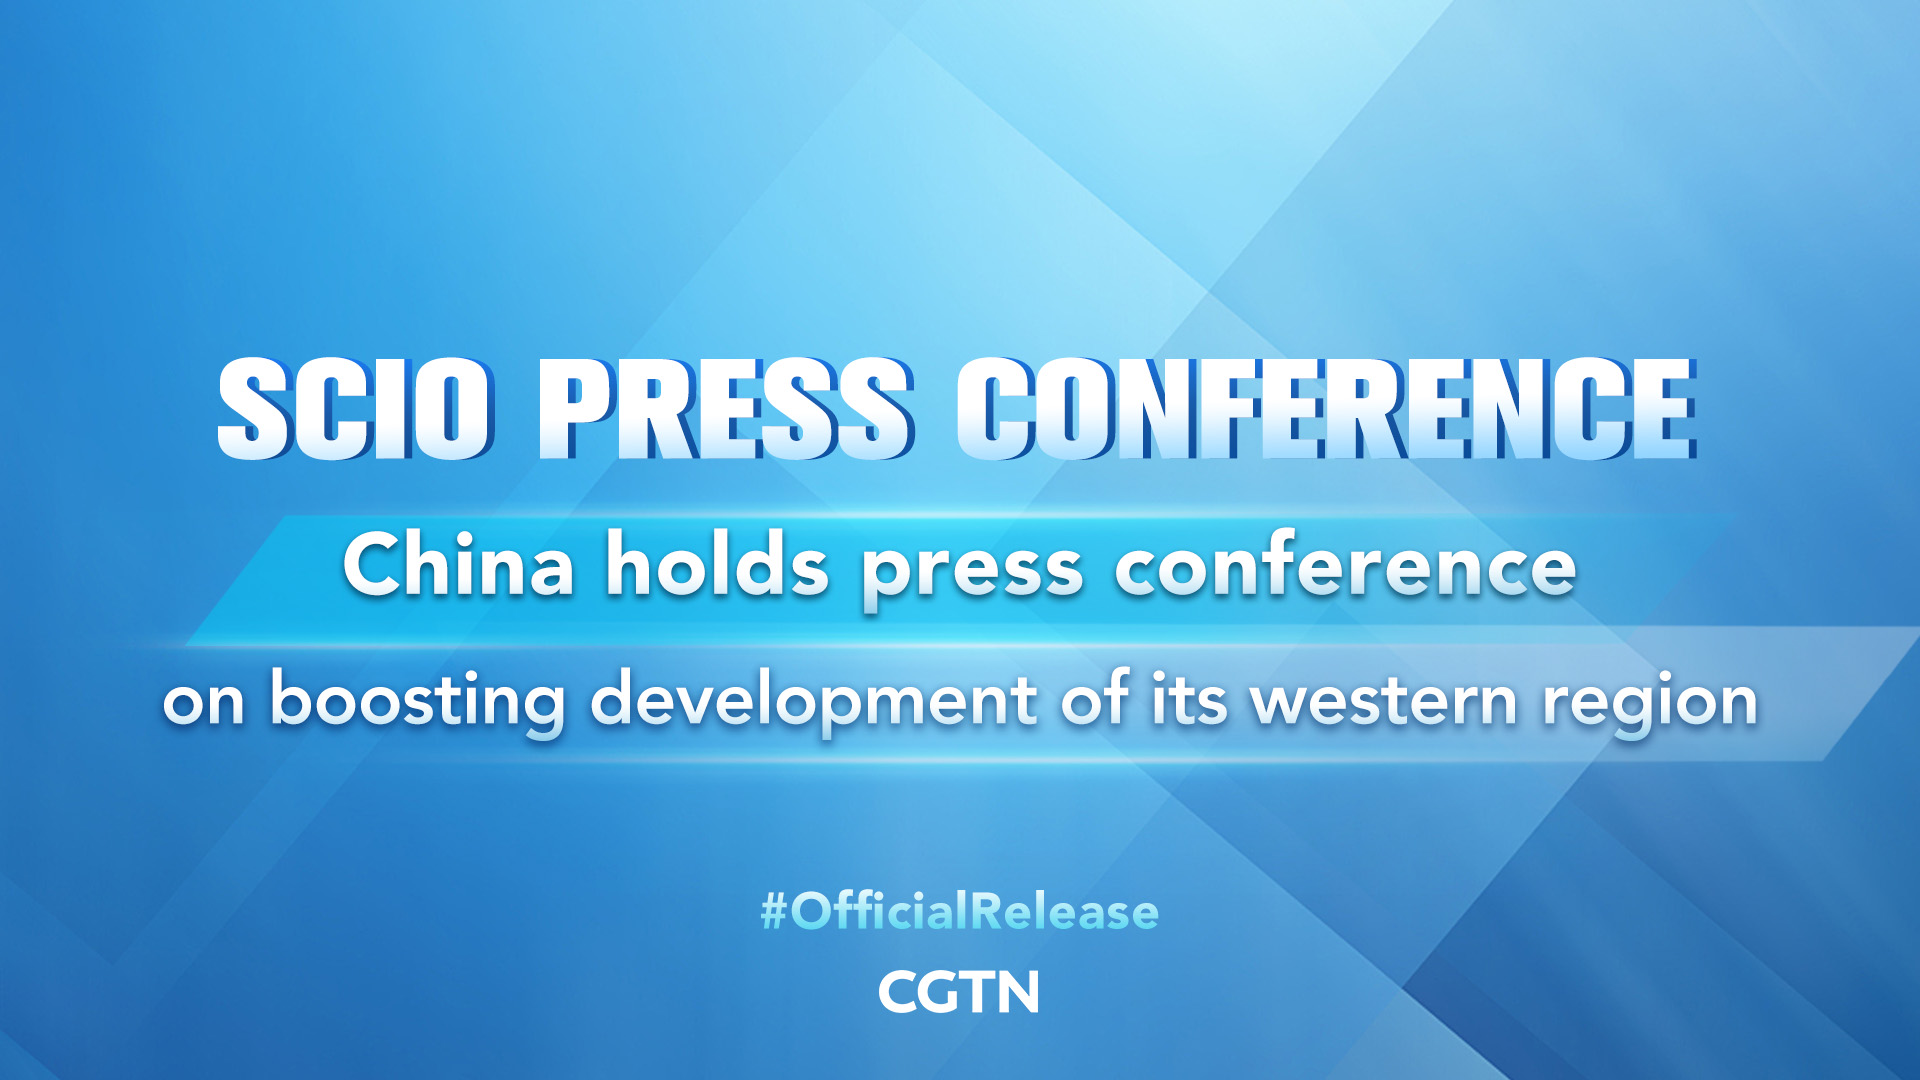 Live: China holds press conference on boosting development of its western region